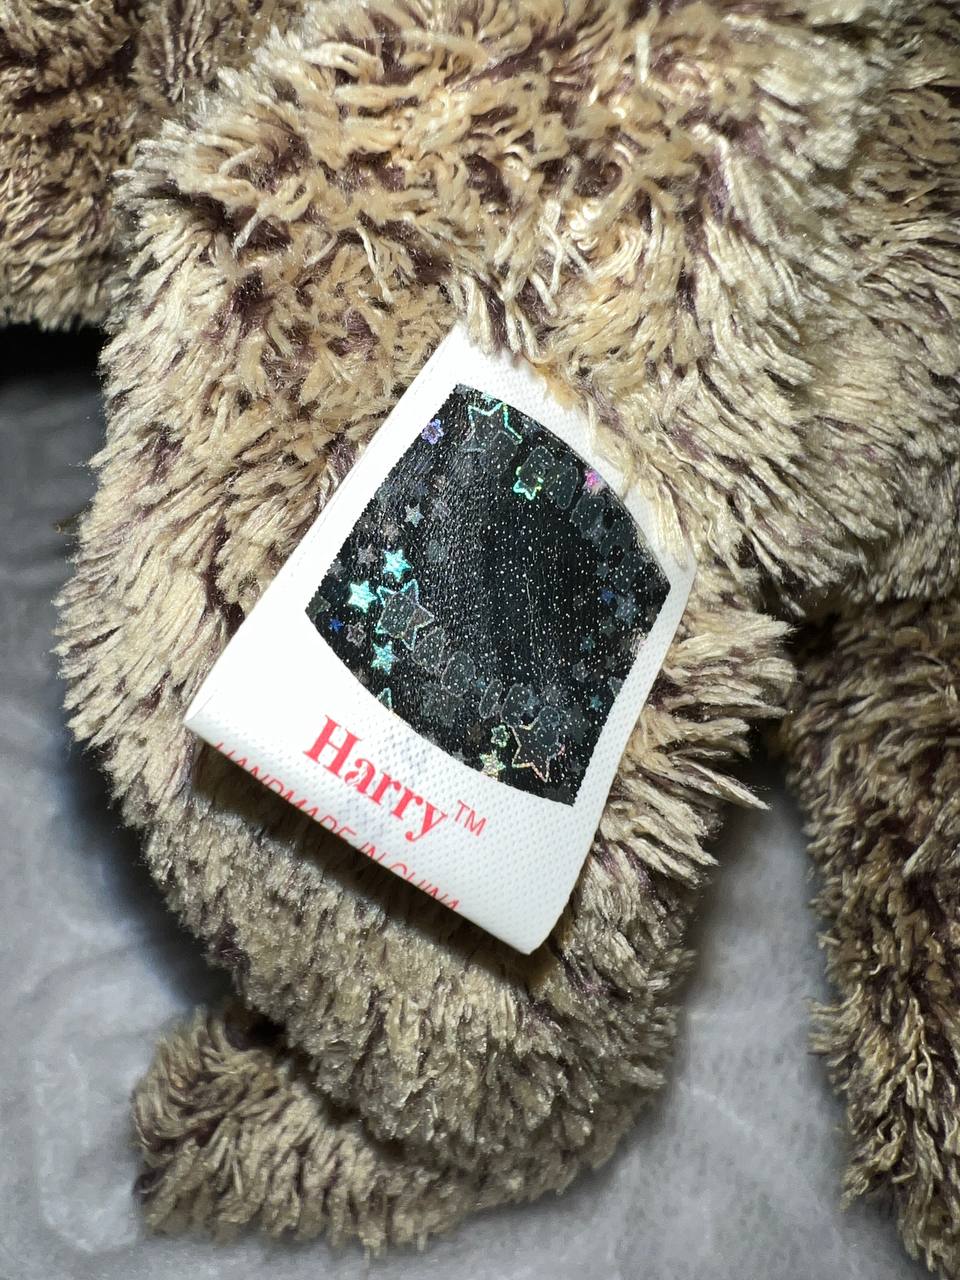 *RARE* MINT Harry Beanie Baby 2001 With Tag